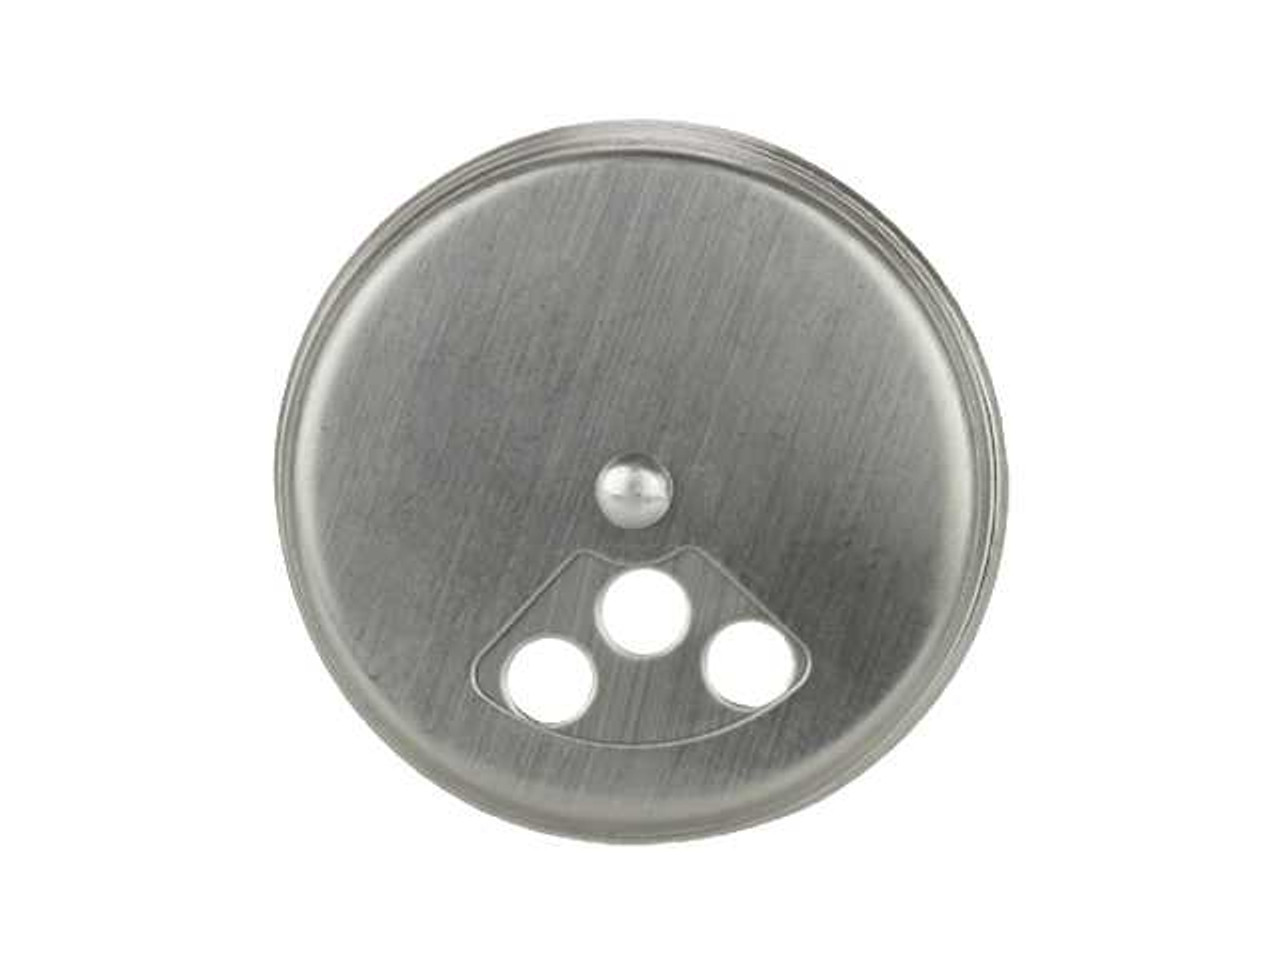  24 Stainless Steel Revolving Lids for Square Spice Bottles -  Caps for SpiceLuxe Glass Square Spice Jars ONLY: Home & Kitchen